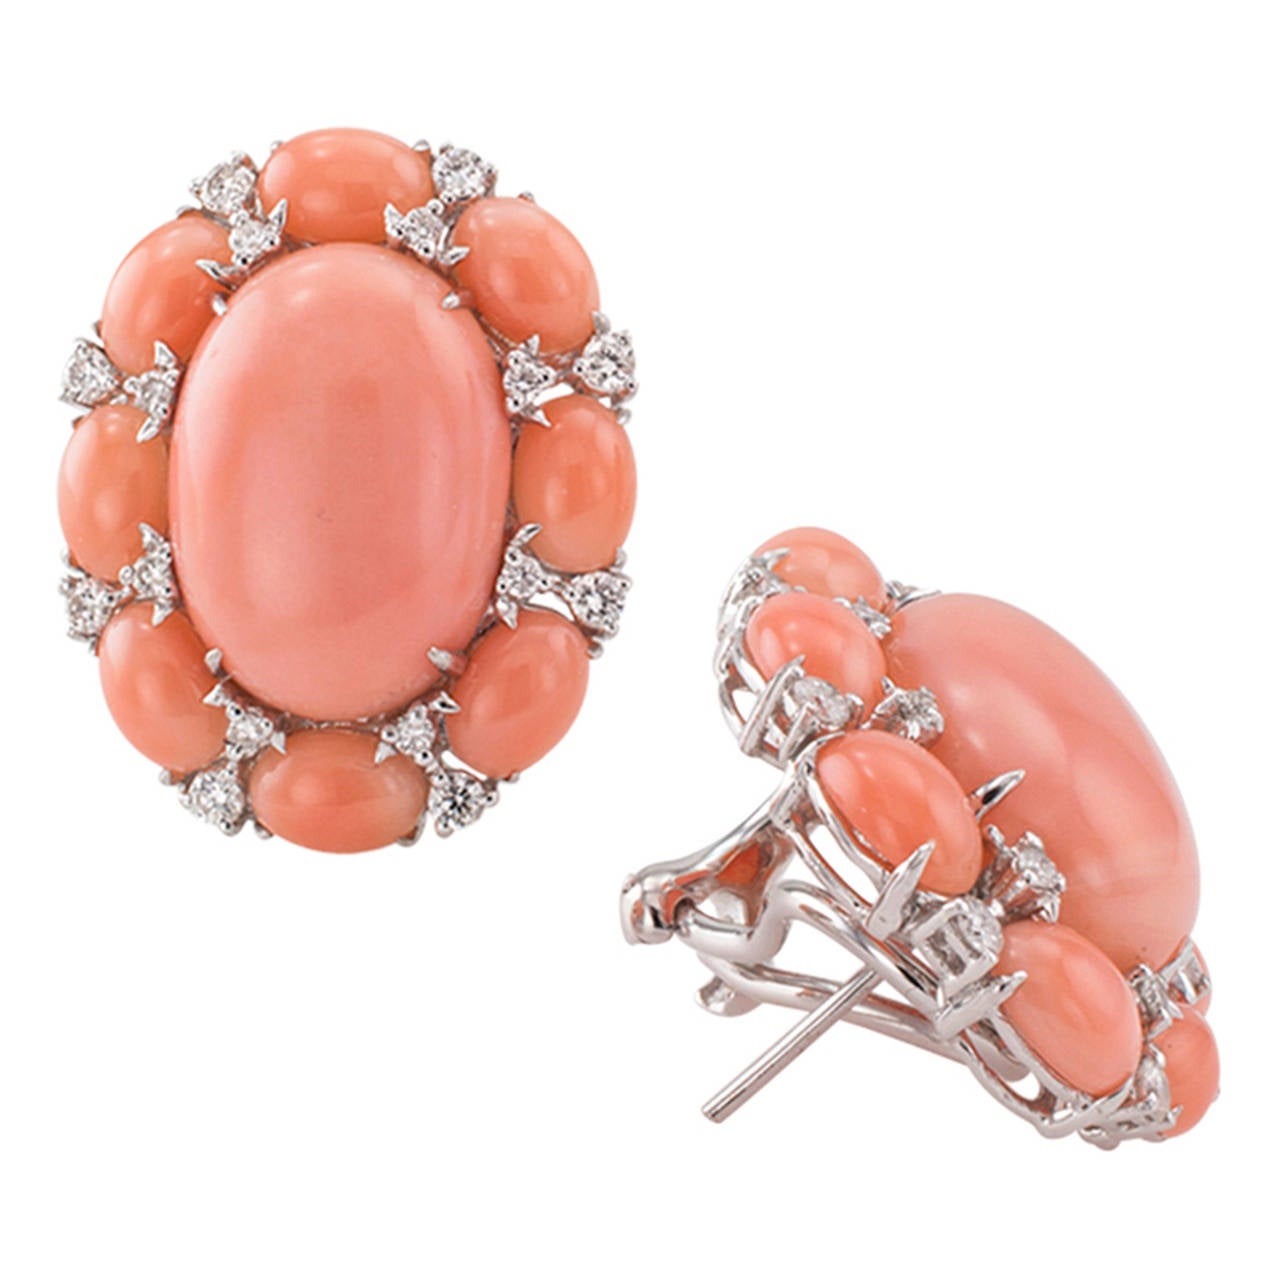 Estate Coral And Diamond Earrings

A really pretty shade of coral, so well matched throughout, with just the right amount of diamonds bringing their special kind of glitter and sparkle to what amounts to a very elegant and beautiful pair of